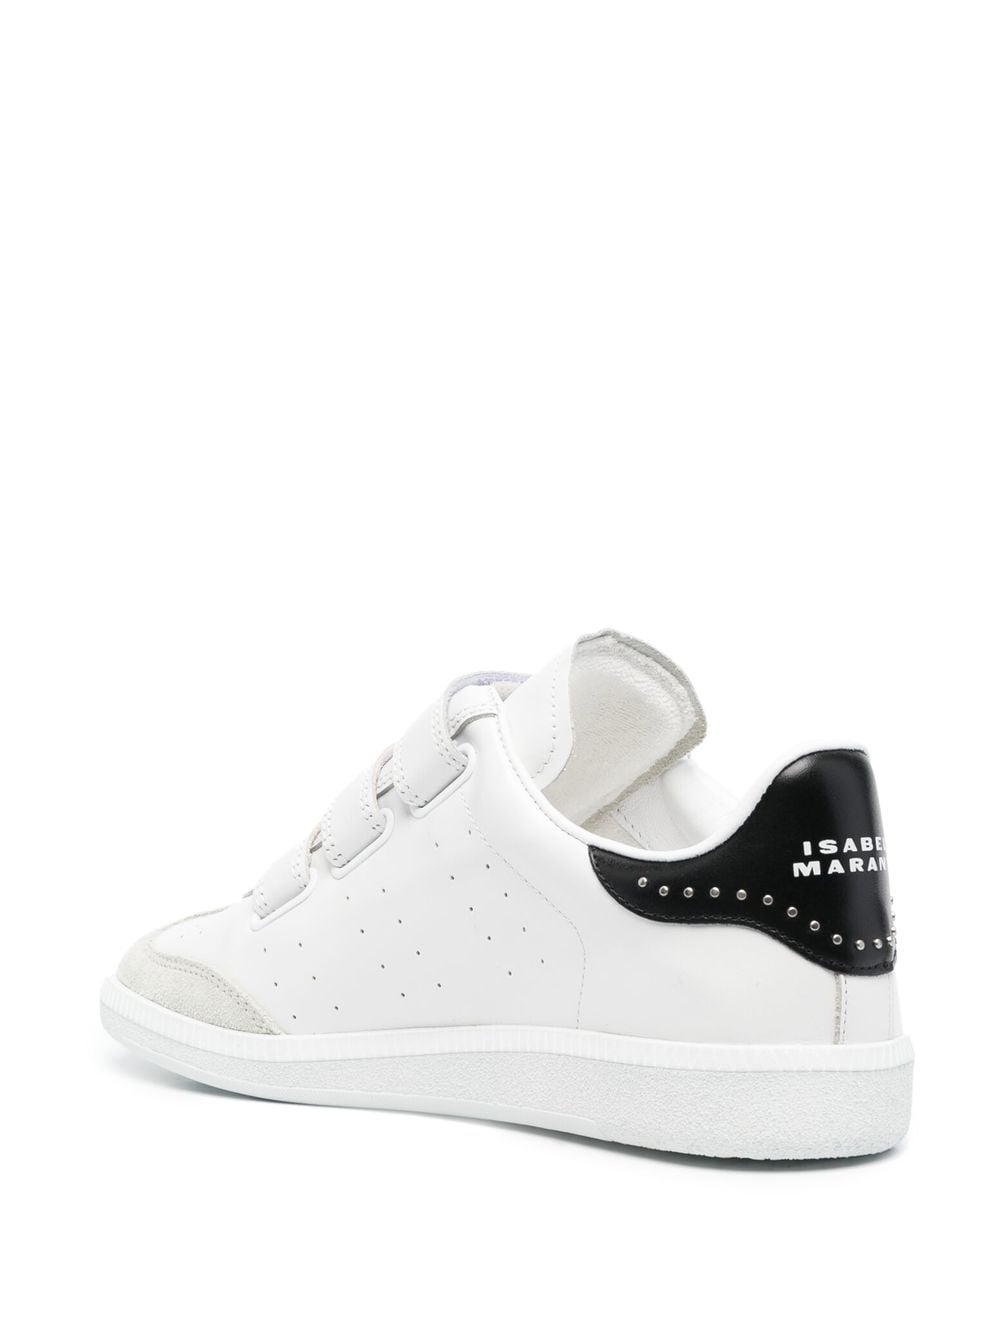 BETH sneakers studded classic, black heel counter